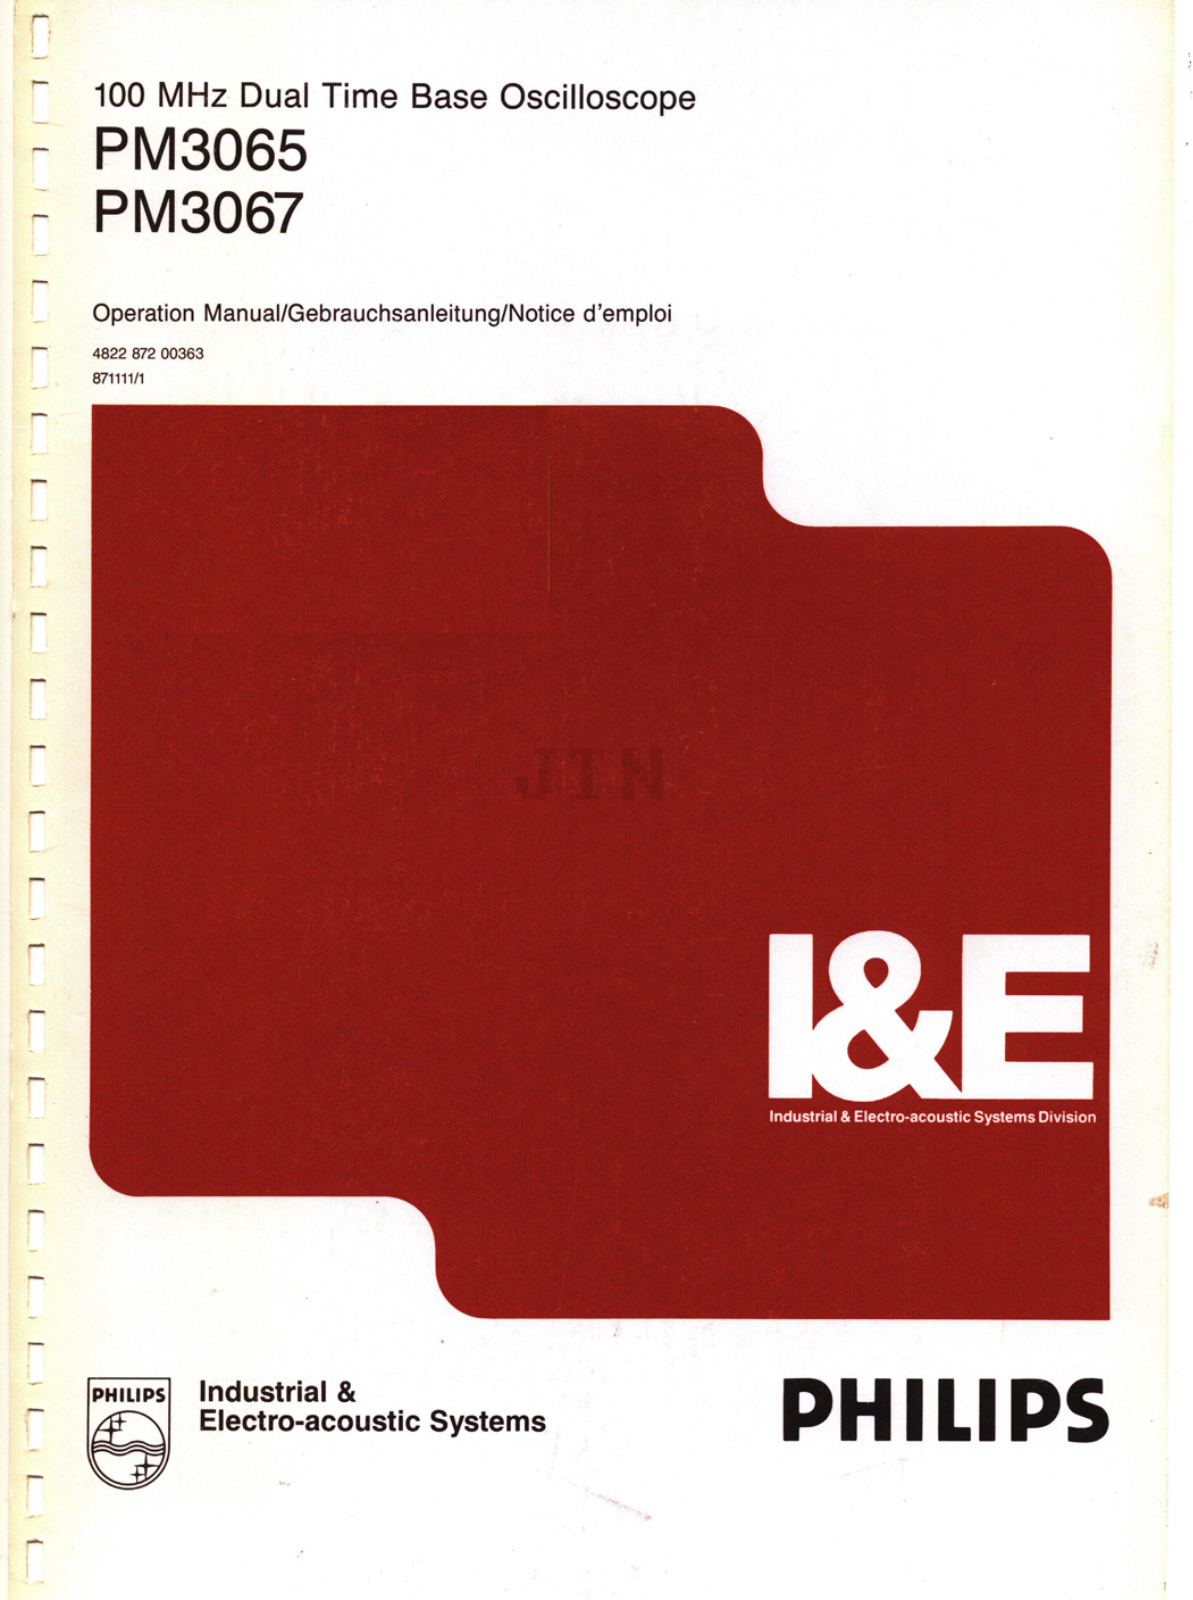 Philips PM3067, PM3065 User Manual